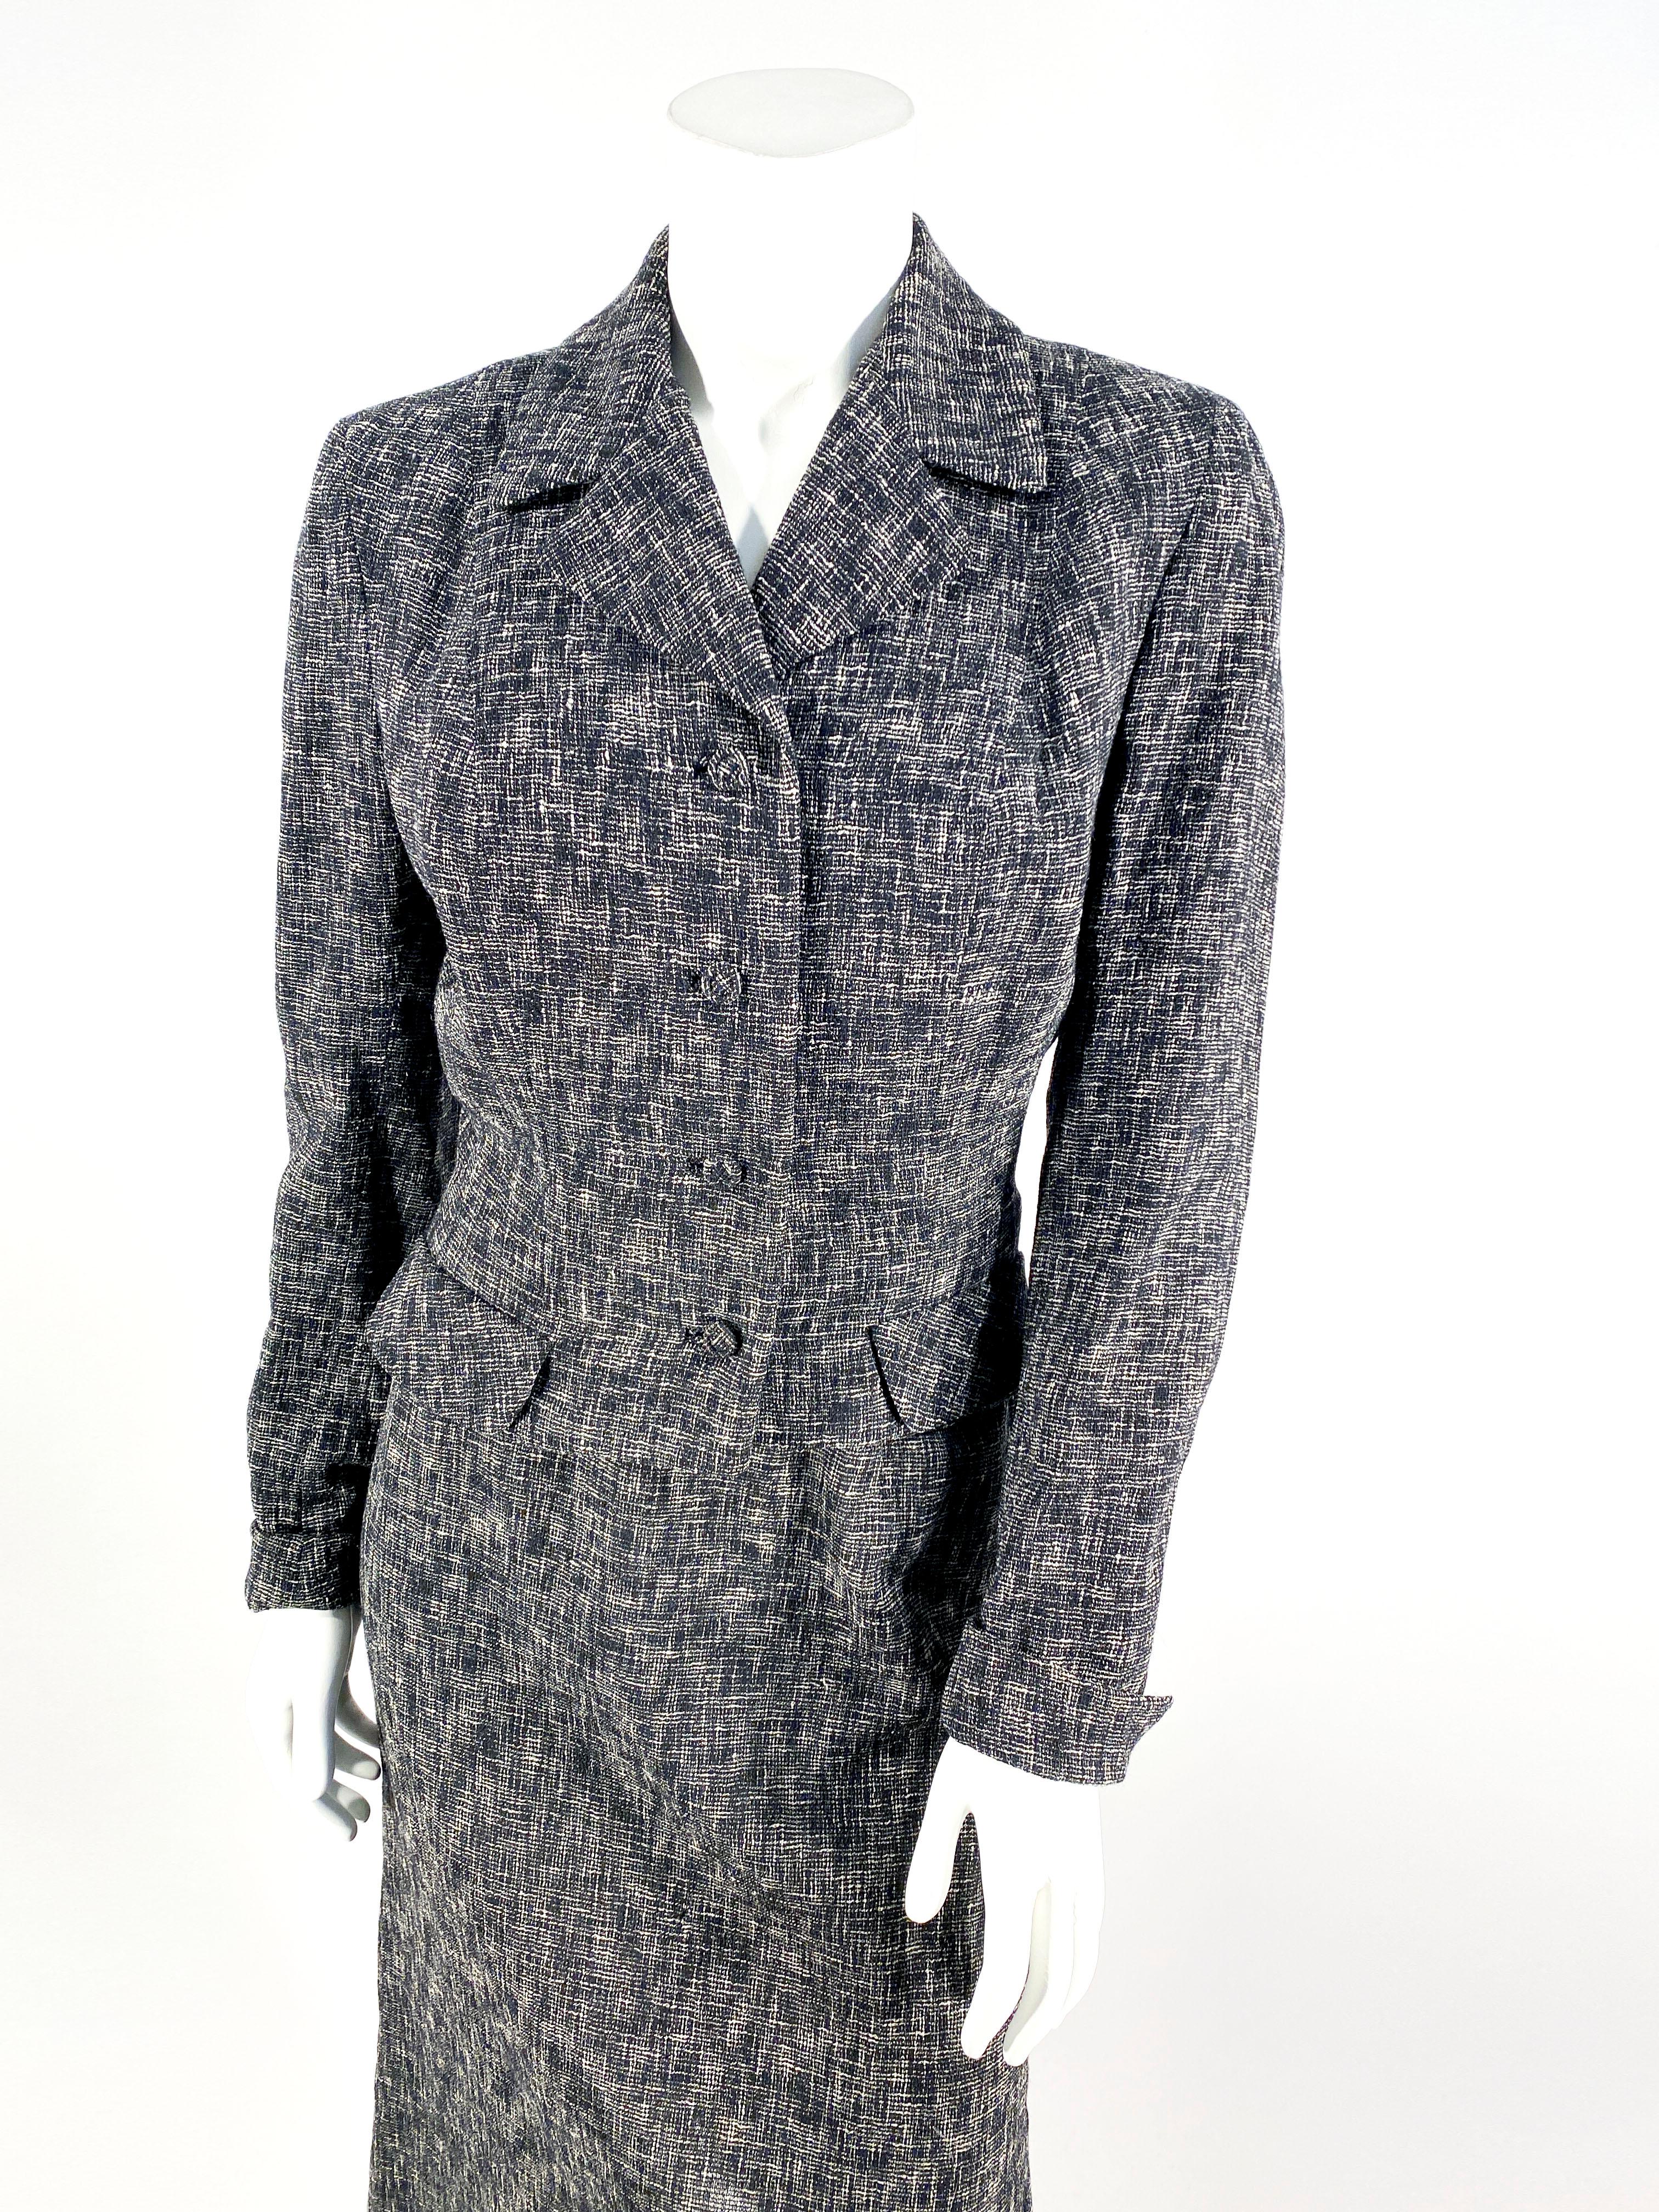 1950s Black and Grey Flecked Suit In Good Condition For Sale In San Francisco, CA